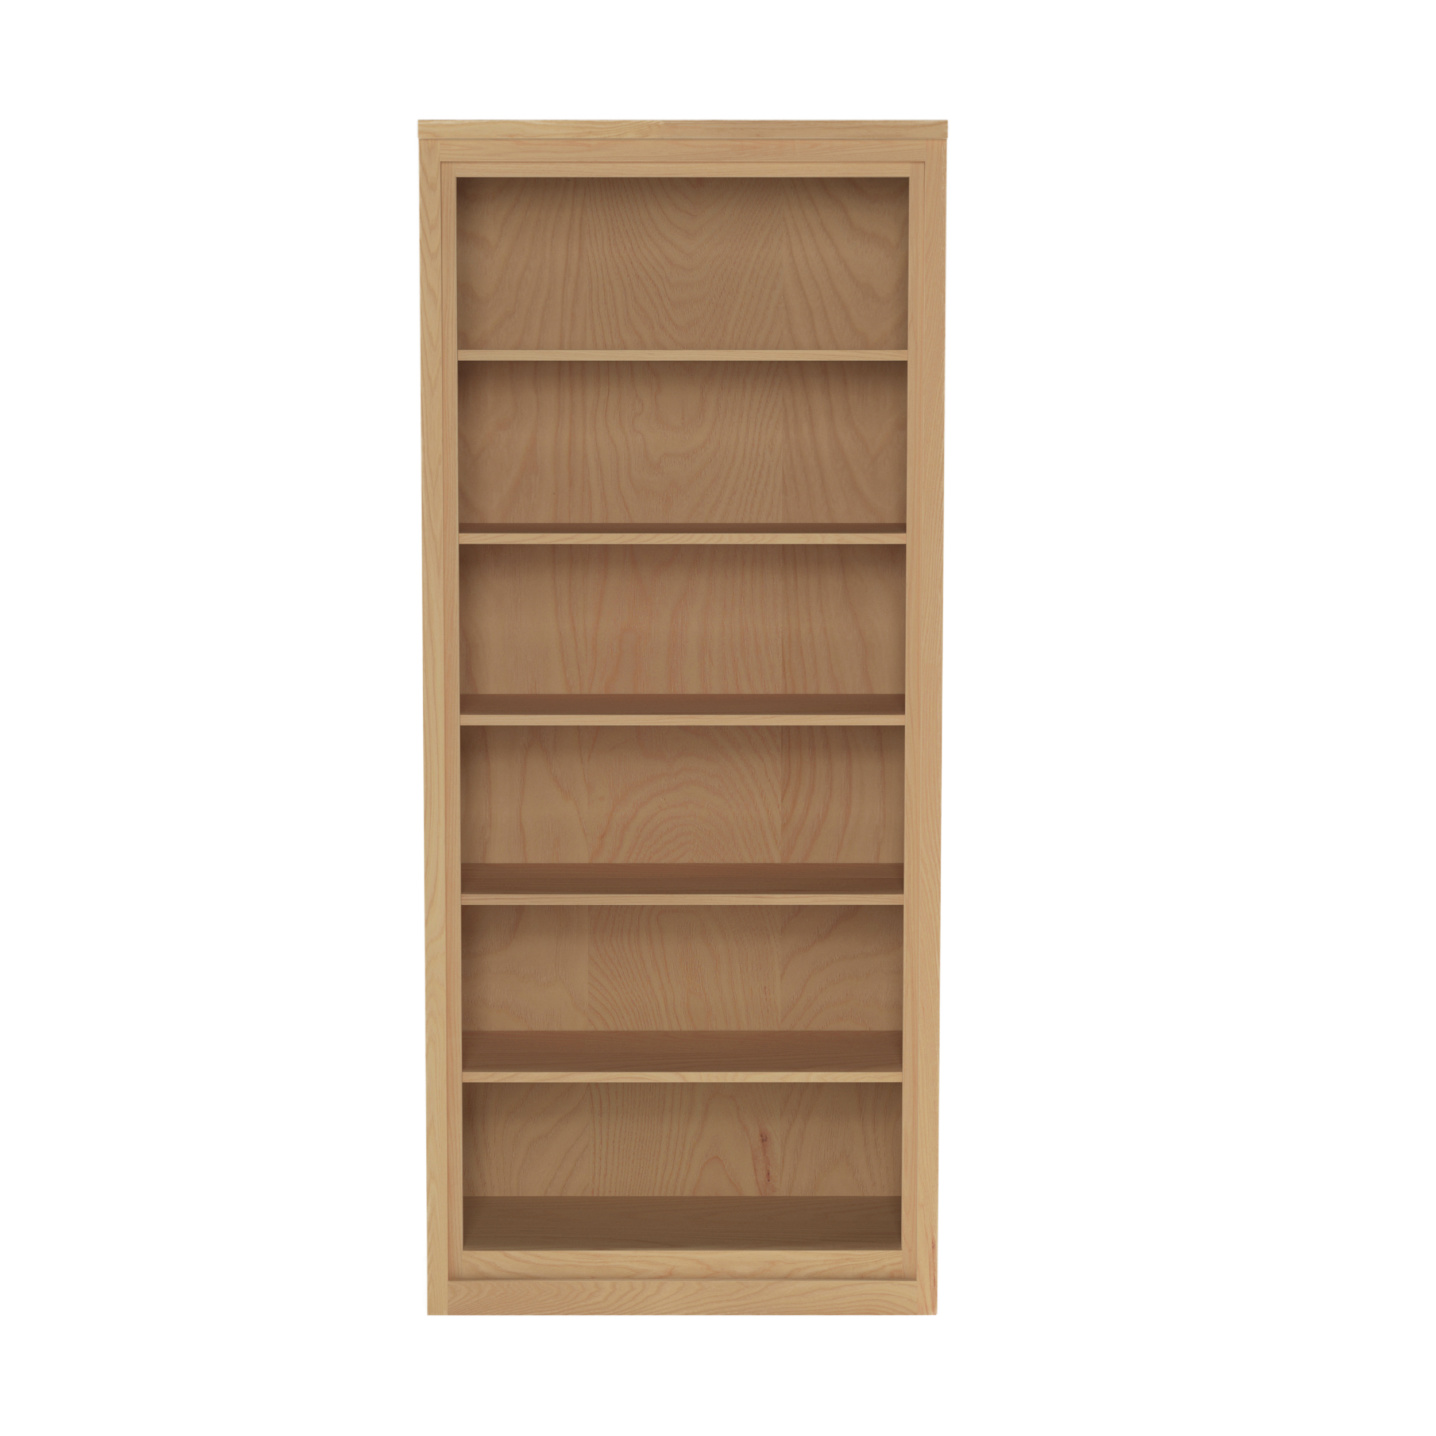 Ash bookcase with solid ash trim